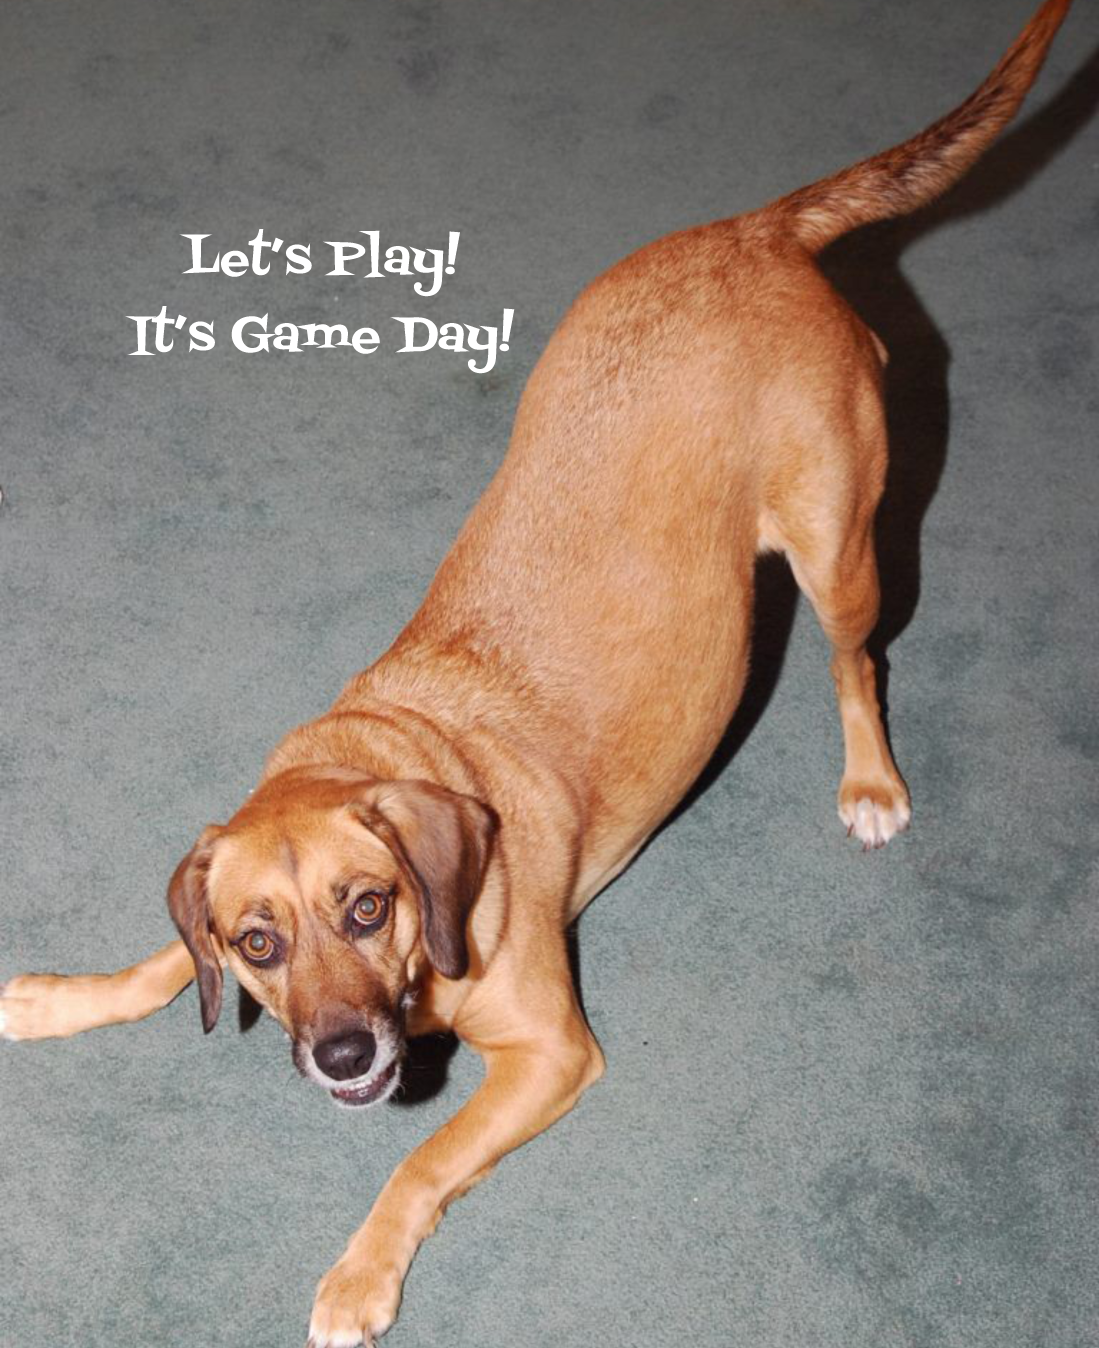 Teaching Your Dog Calm Greeting On Leash, In A Game